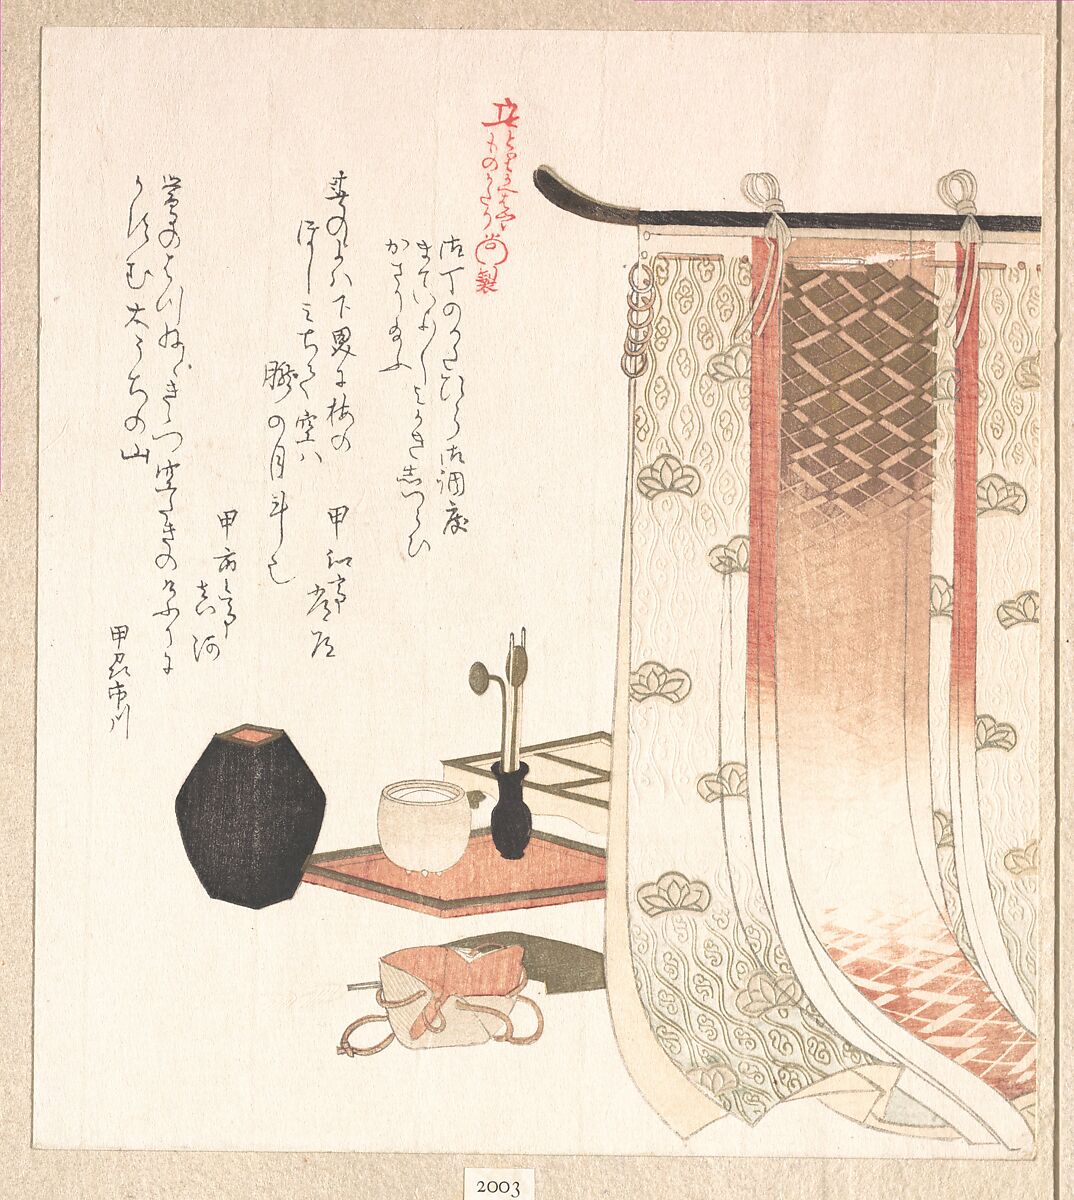 Screen and Utensils for the Incense Ceremony